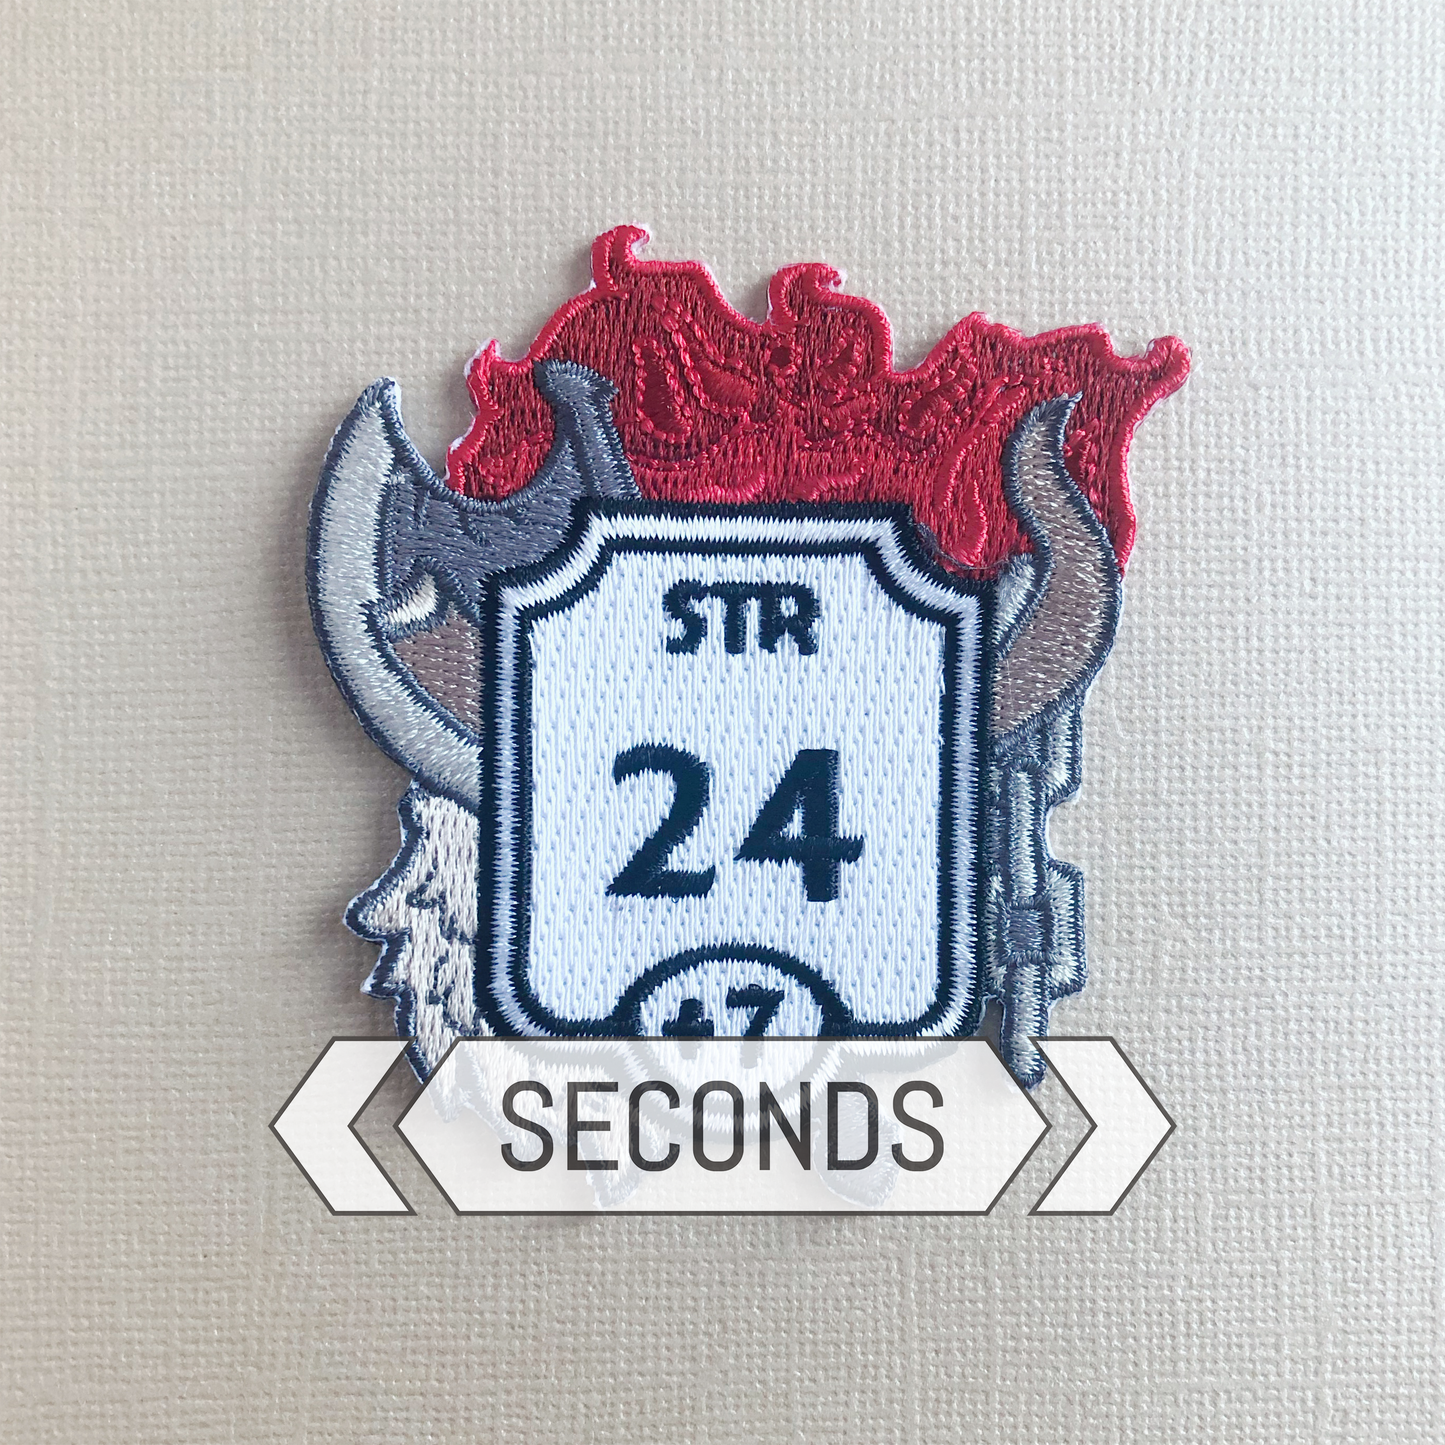 SECONDS Ability Score Patch: Strength (Barbarian)